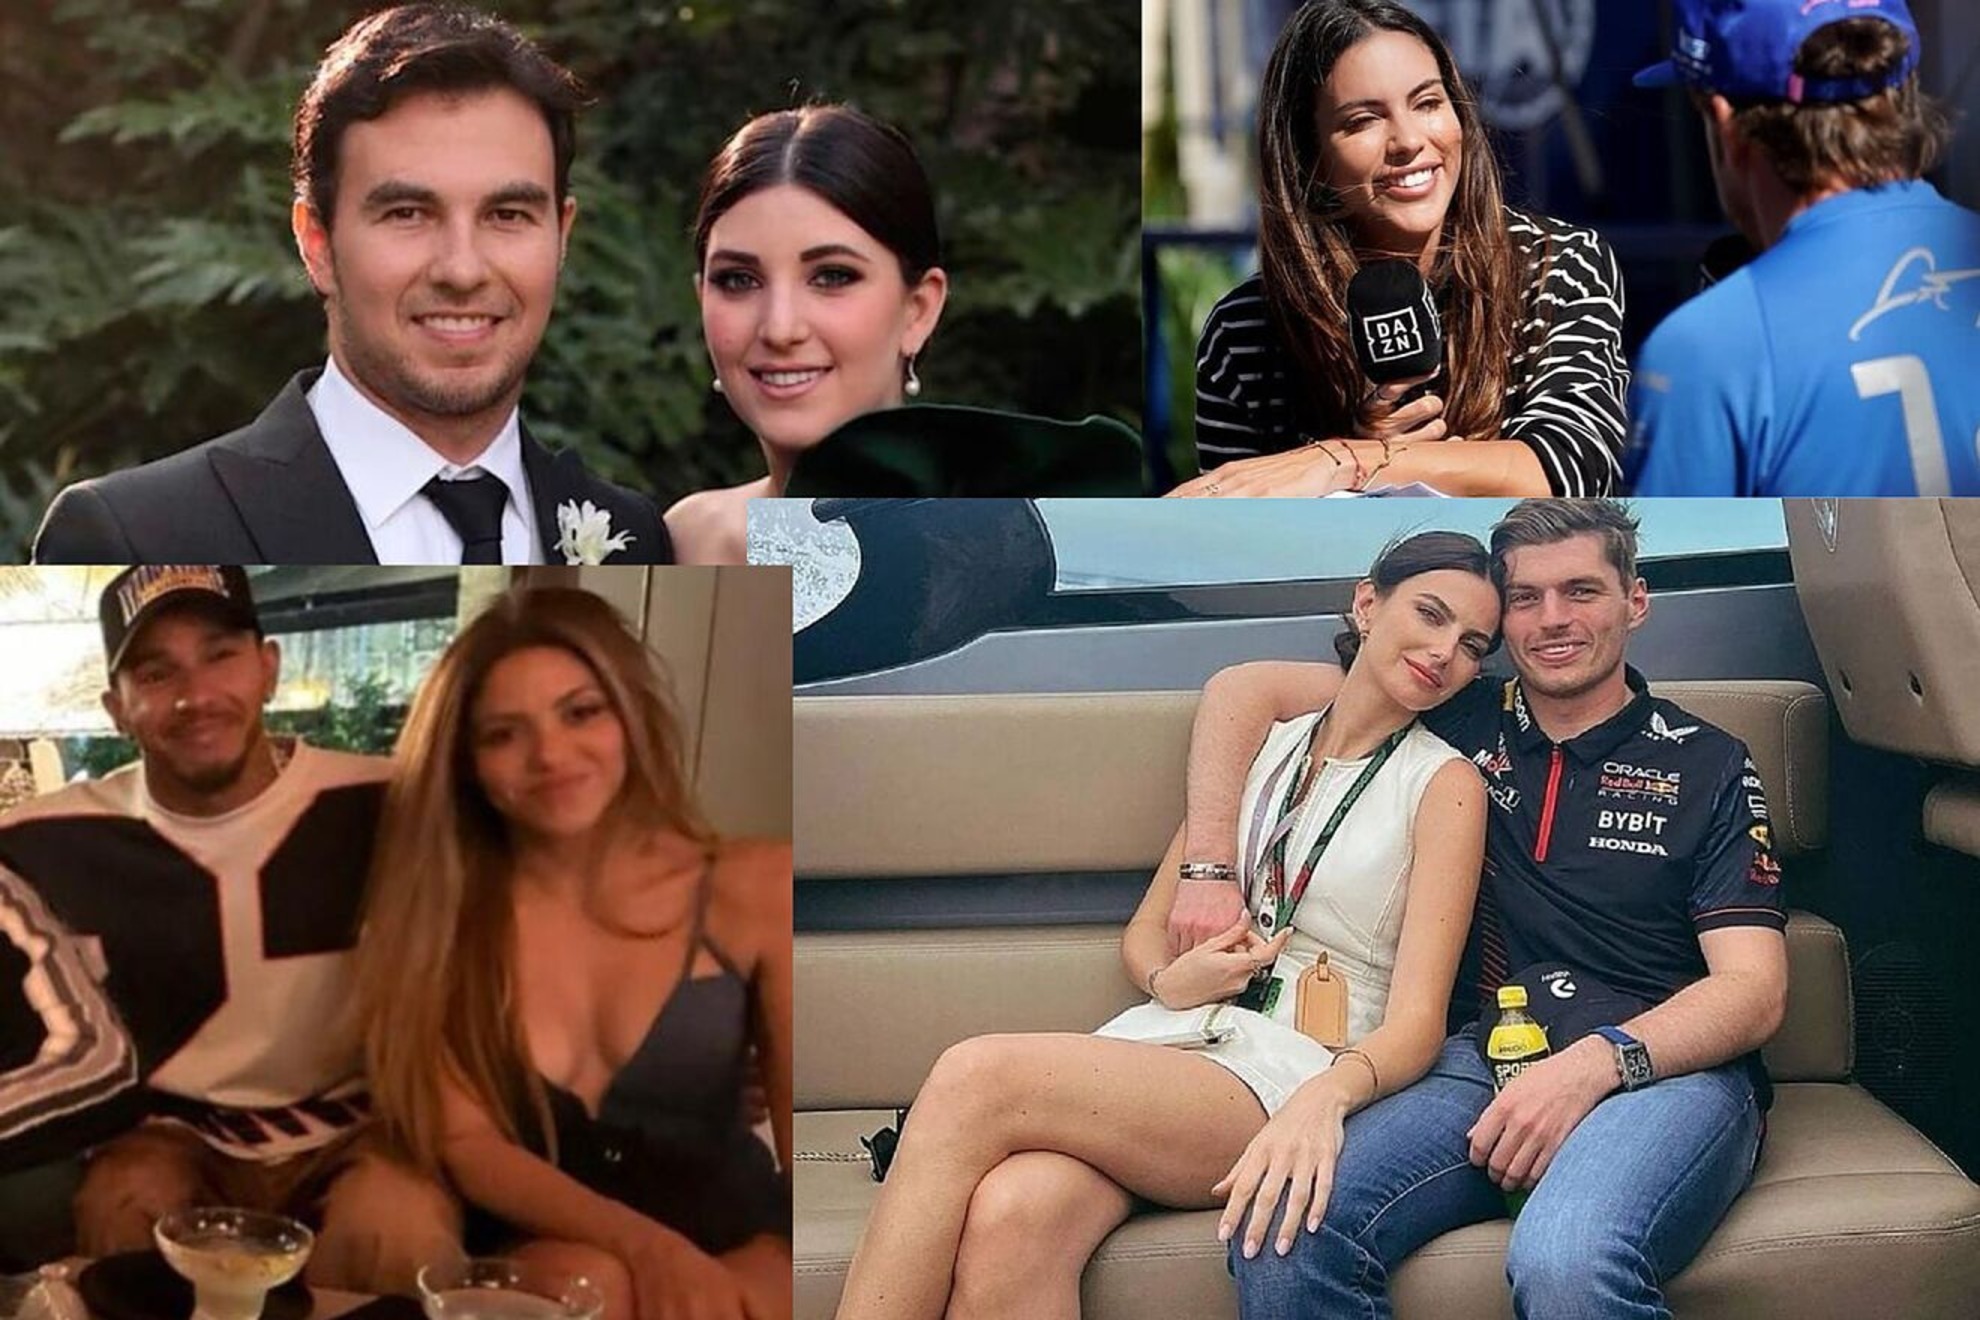 Ranking the 10 Formula 1 WAGS who earn the most on Instagram: Shakiras turnover is mind-blowing